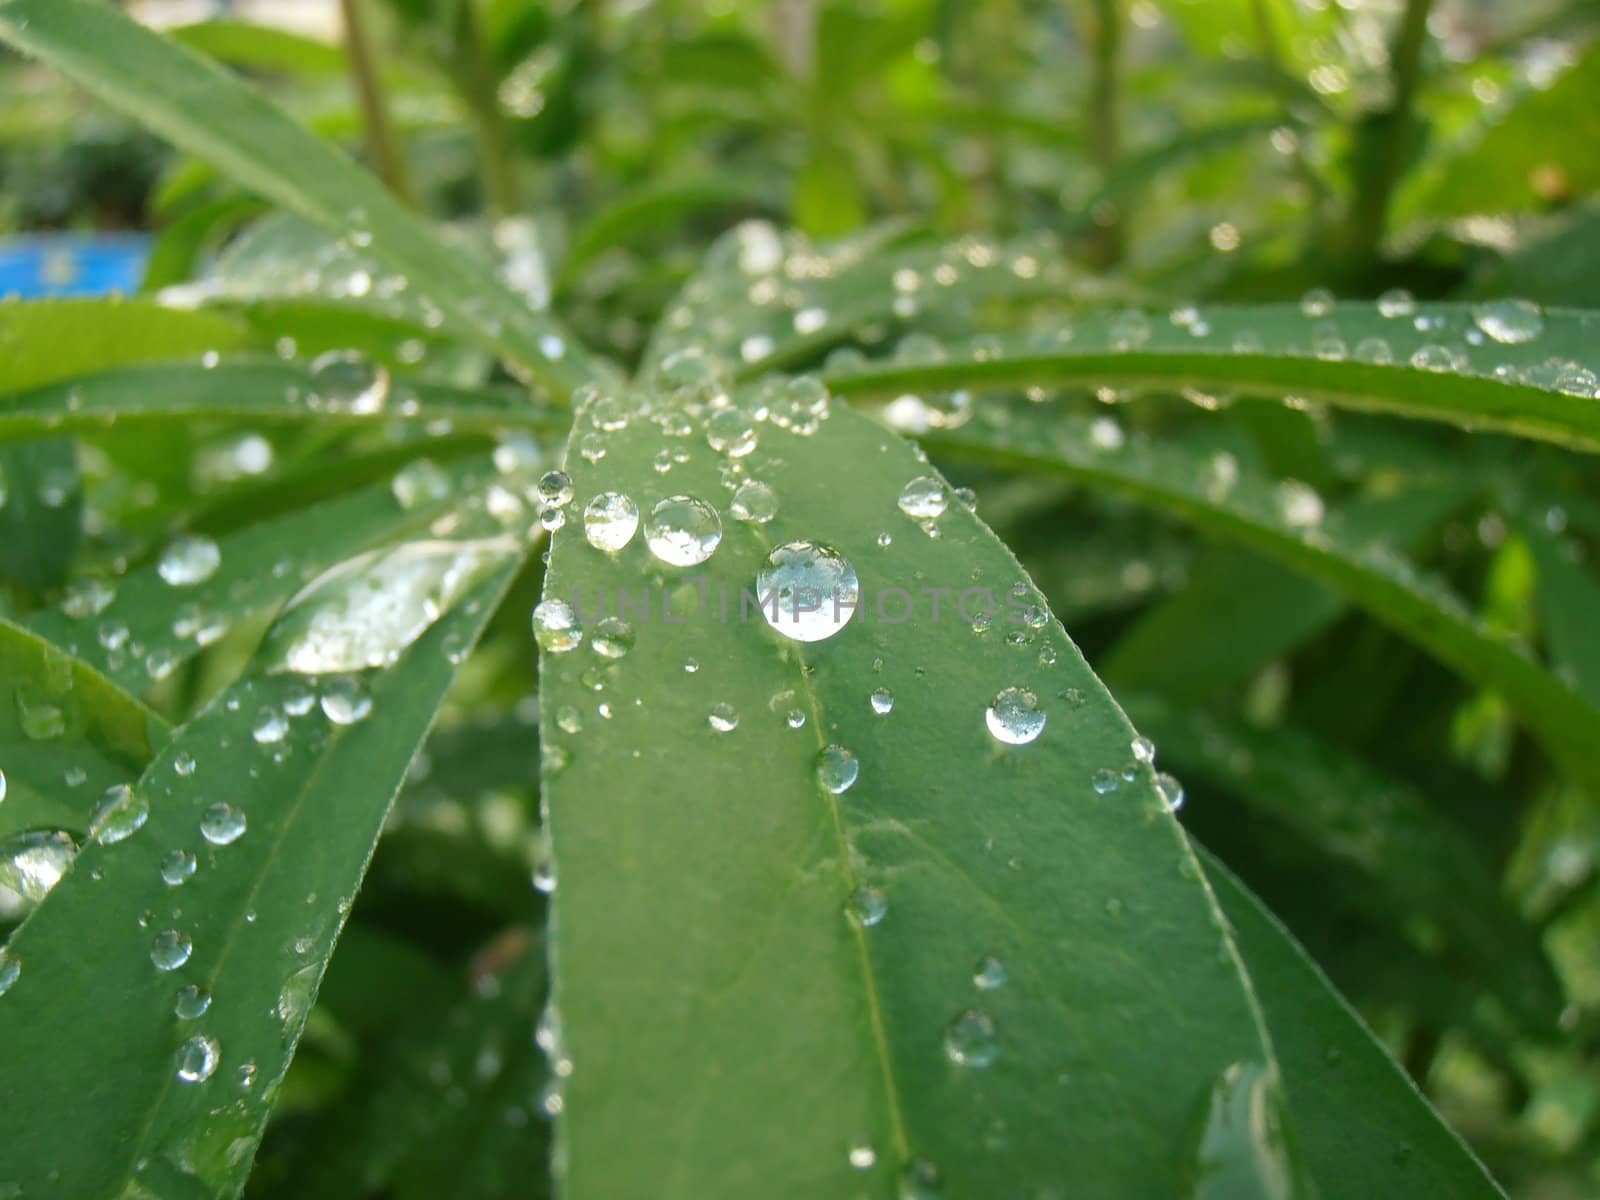 The drops on the leaves of Lupin. by GNNick